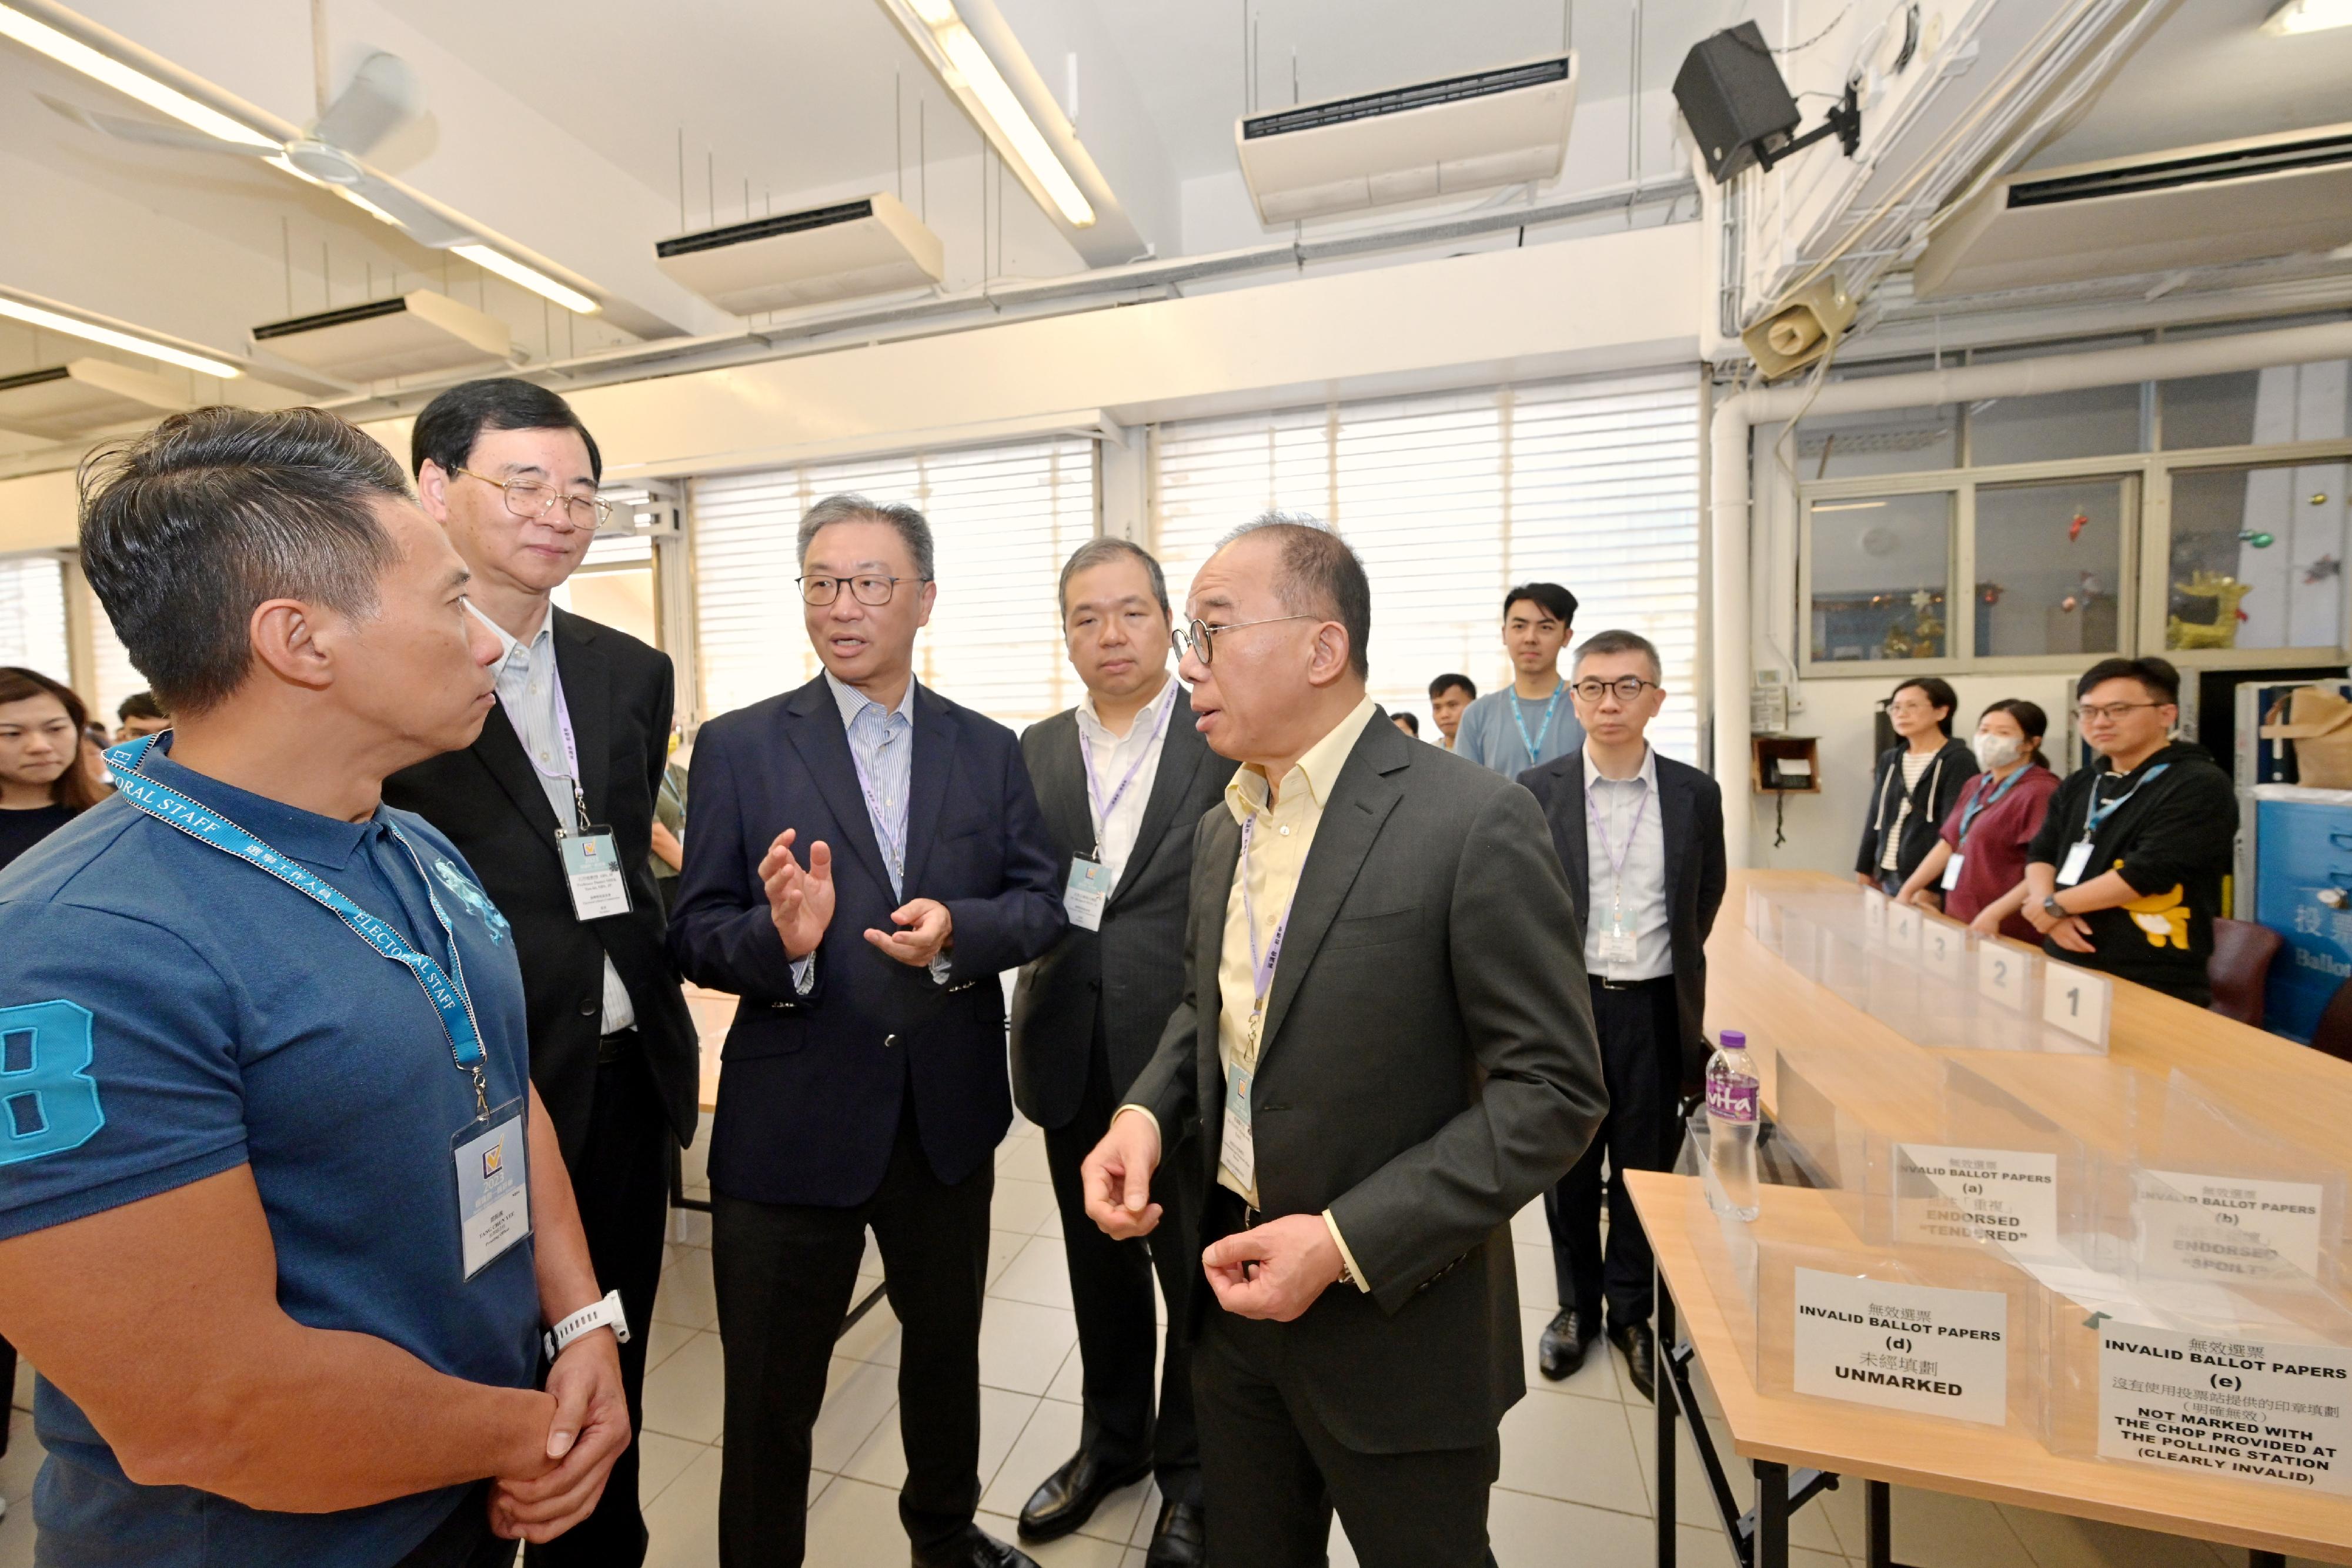 The Chairman of the Electoral Affairs Commission (EAC), Mr Justice David Lok (third left), the Secretary for Constitutional and Mainland Affairs, Mr Erick Tsang Kwok-wai (fifth left); the EAC members Professor Daniel Shek (second left) and Mr Bernard Man, SC (fourth left), visit a near boundary polling station of the 2023 District Council Ordinary Election this afternoon (December 9) to inspect the preparatory work.